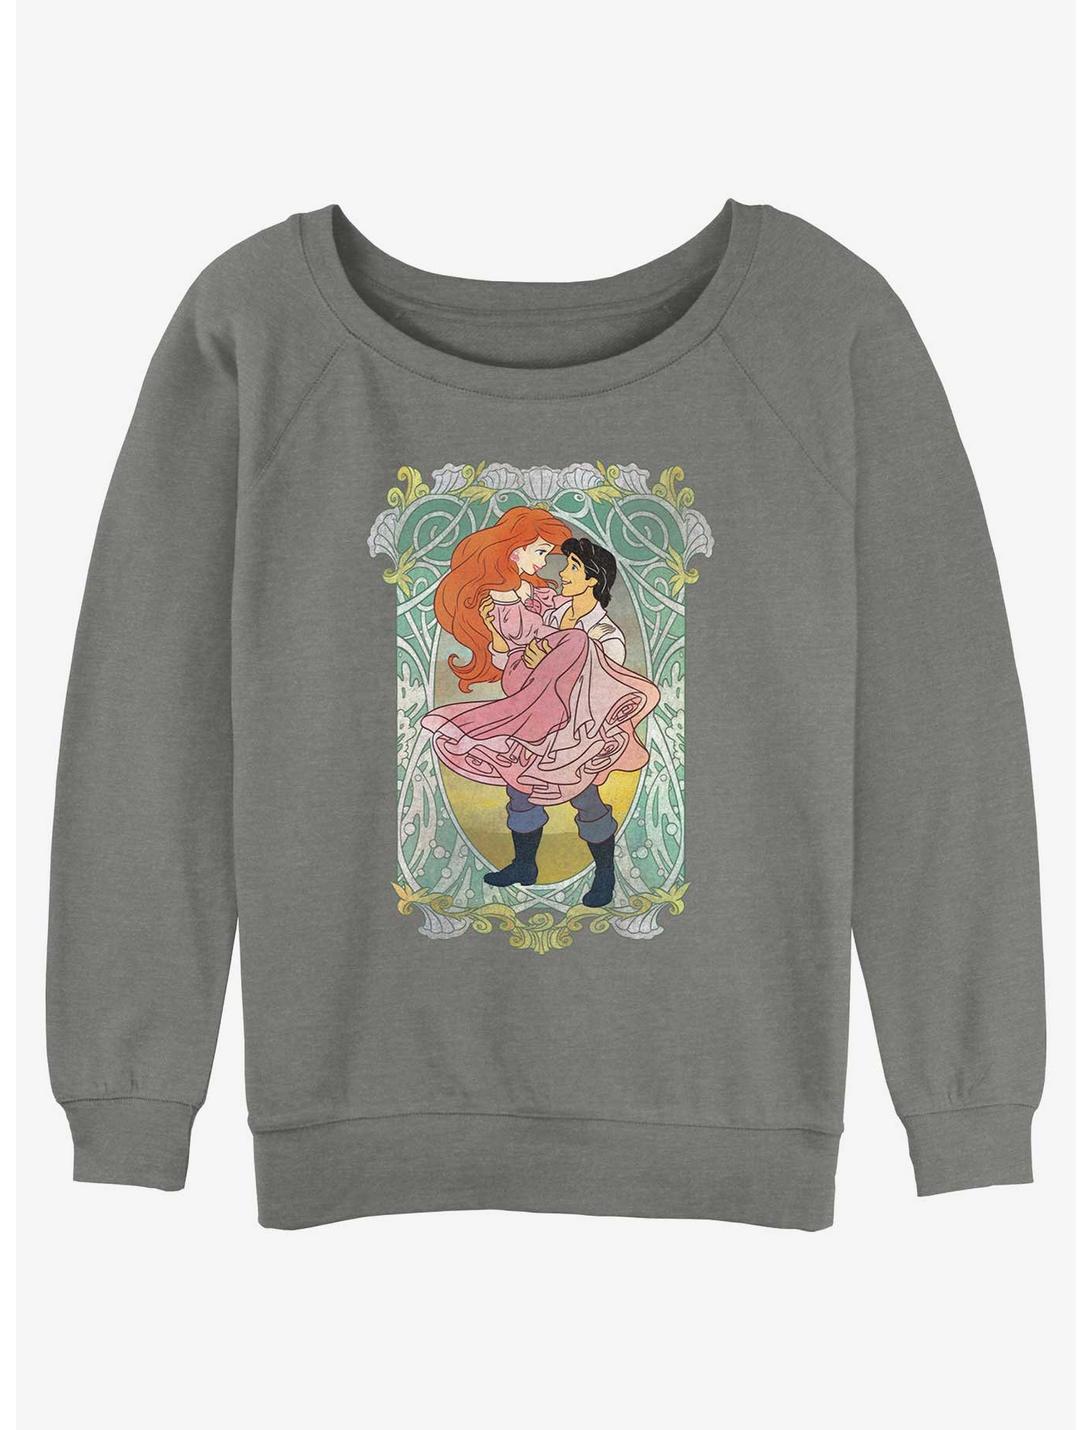 Disney The Little Mermaid Ariel and Eric Ever After Womens Slouchy Sweatshirt, GRAY HTR, hi-res